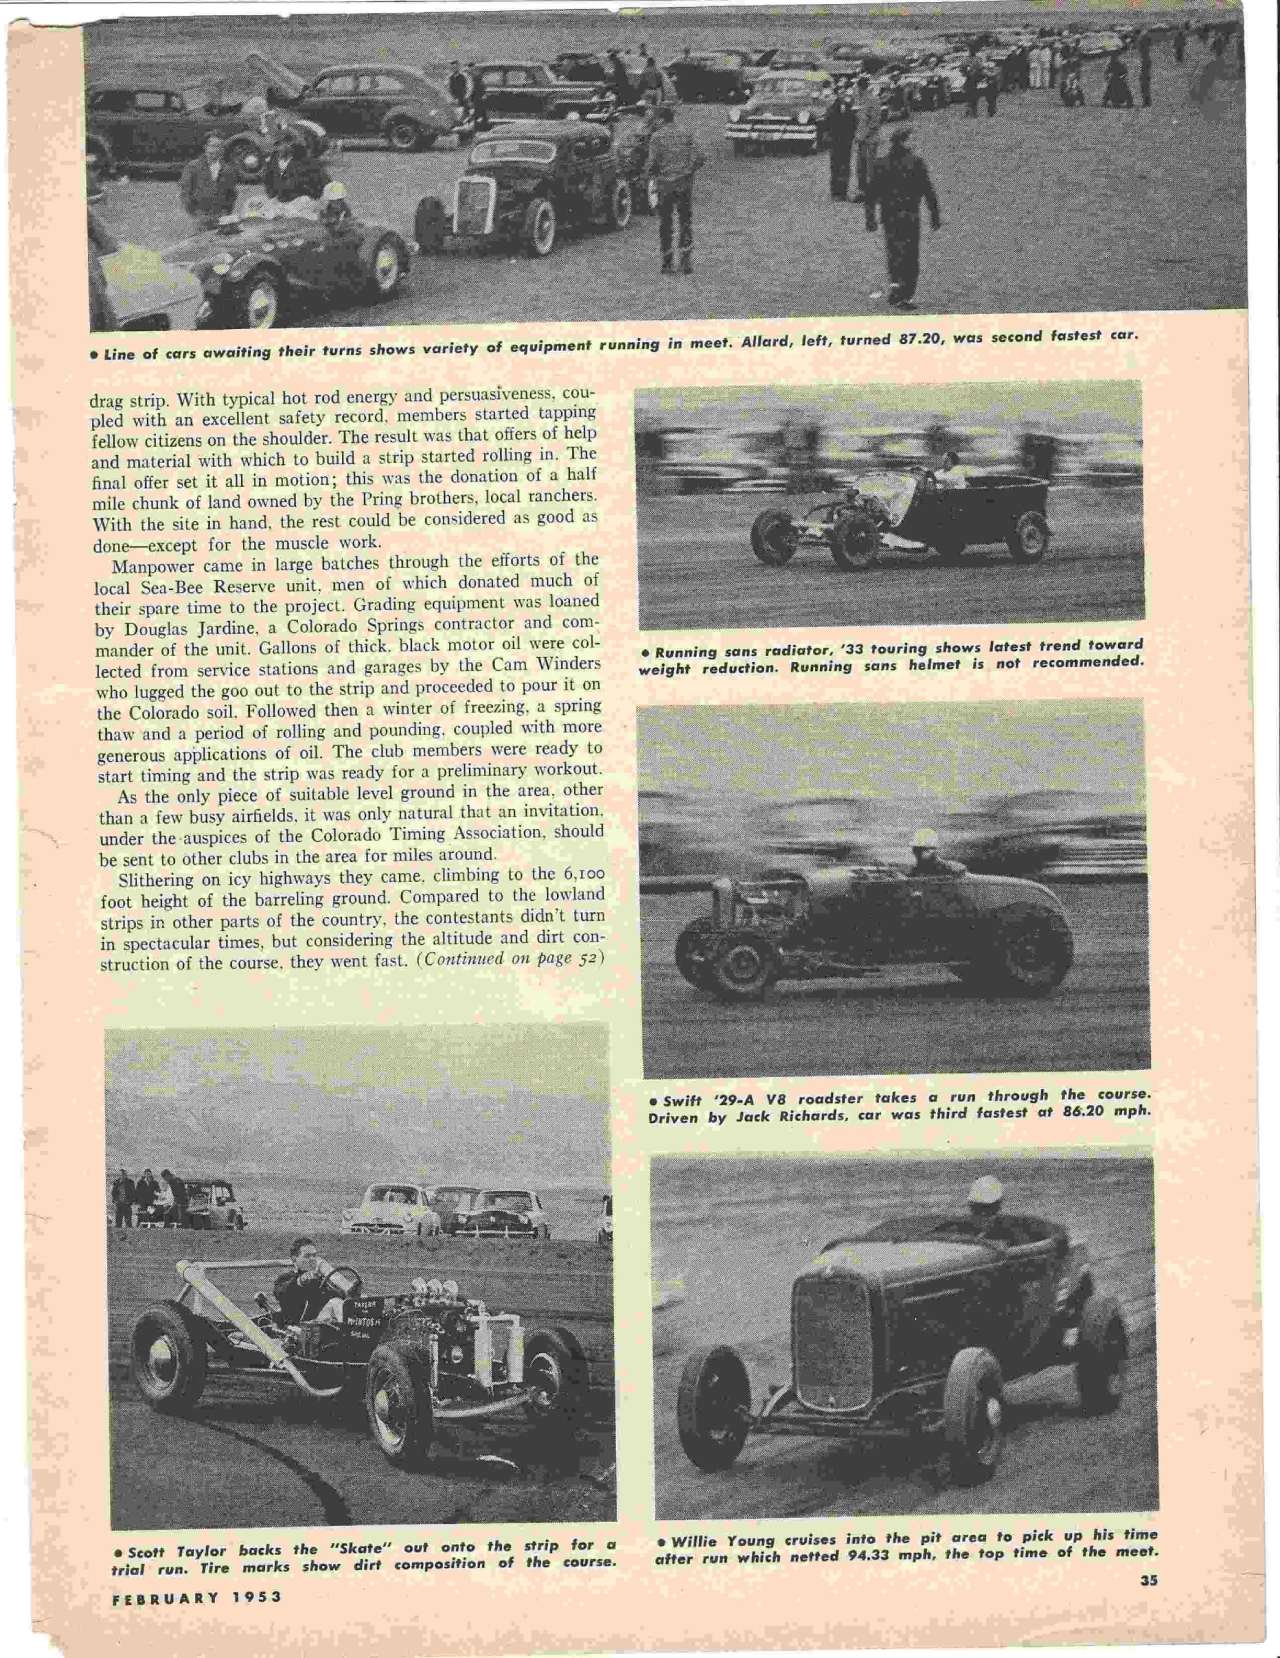 An Article about vintage cars and model numbers